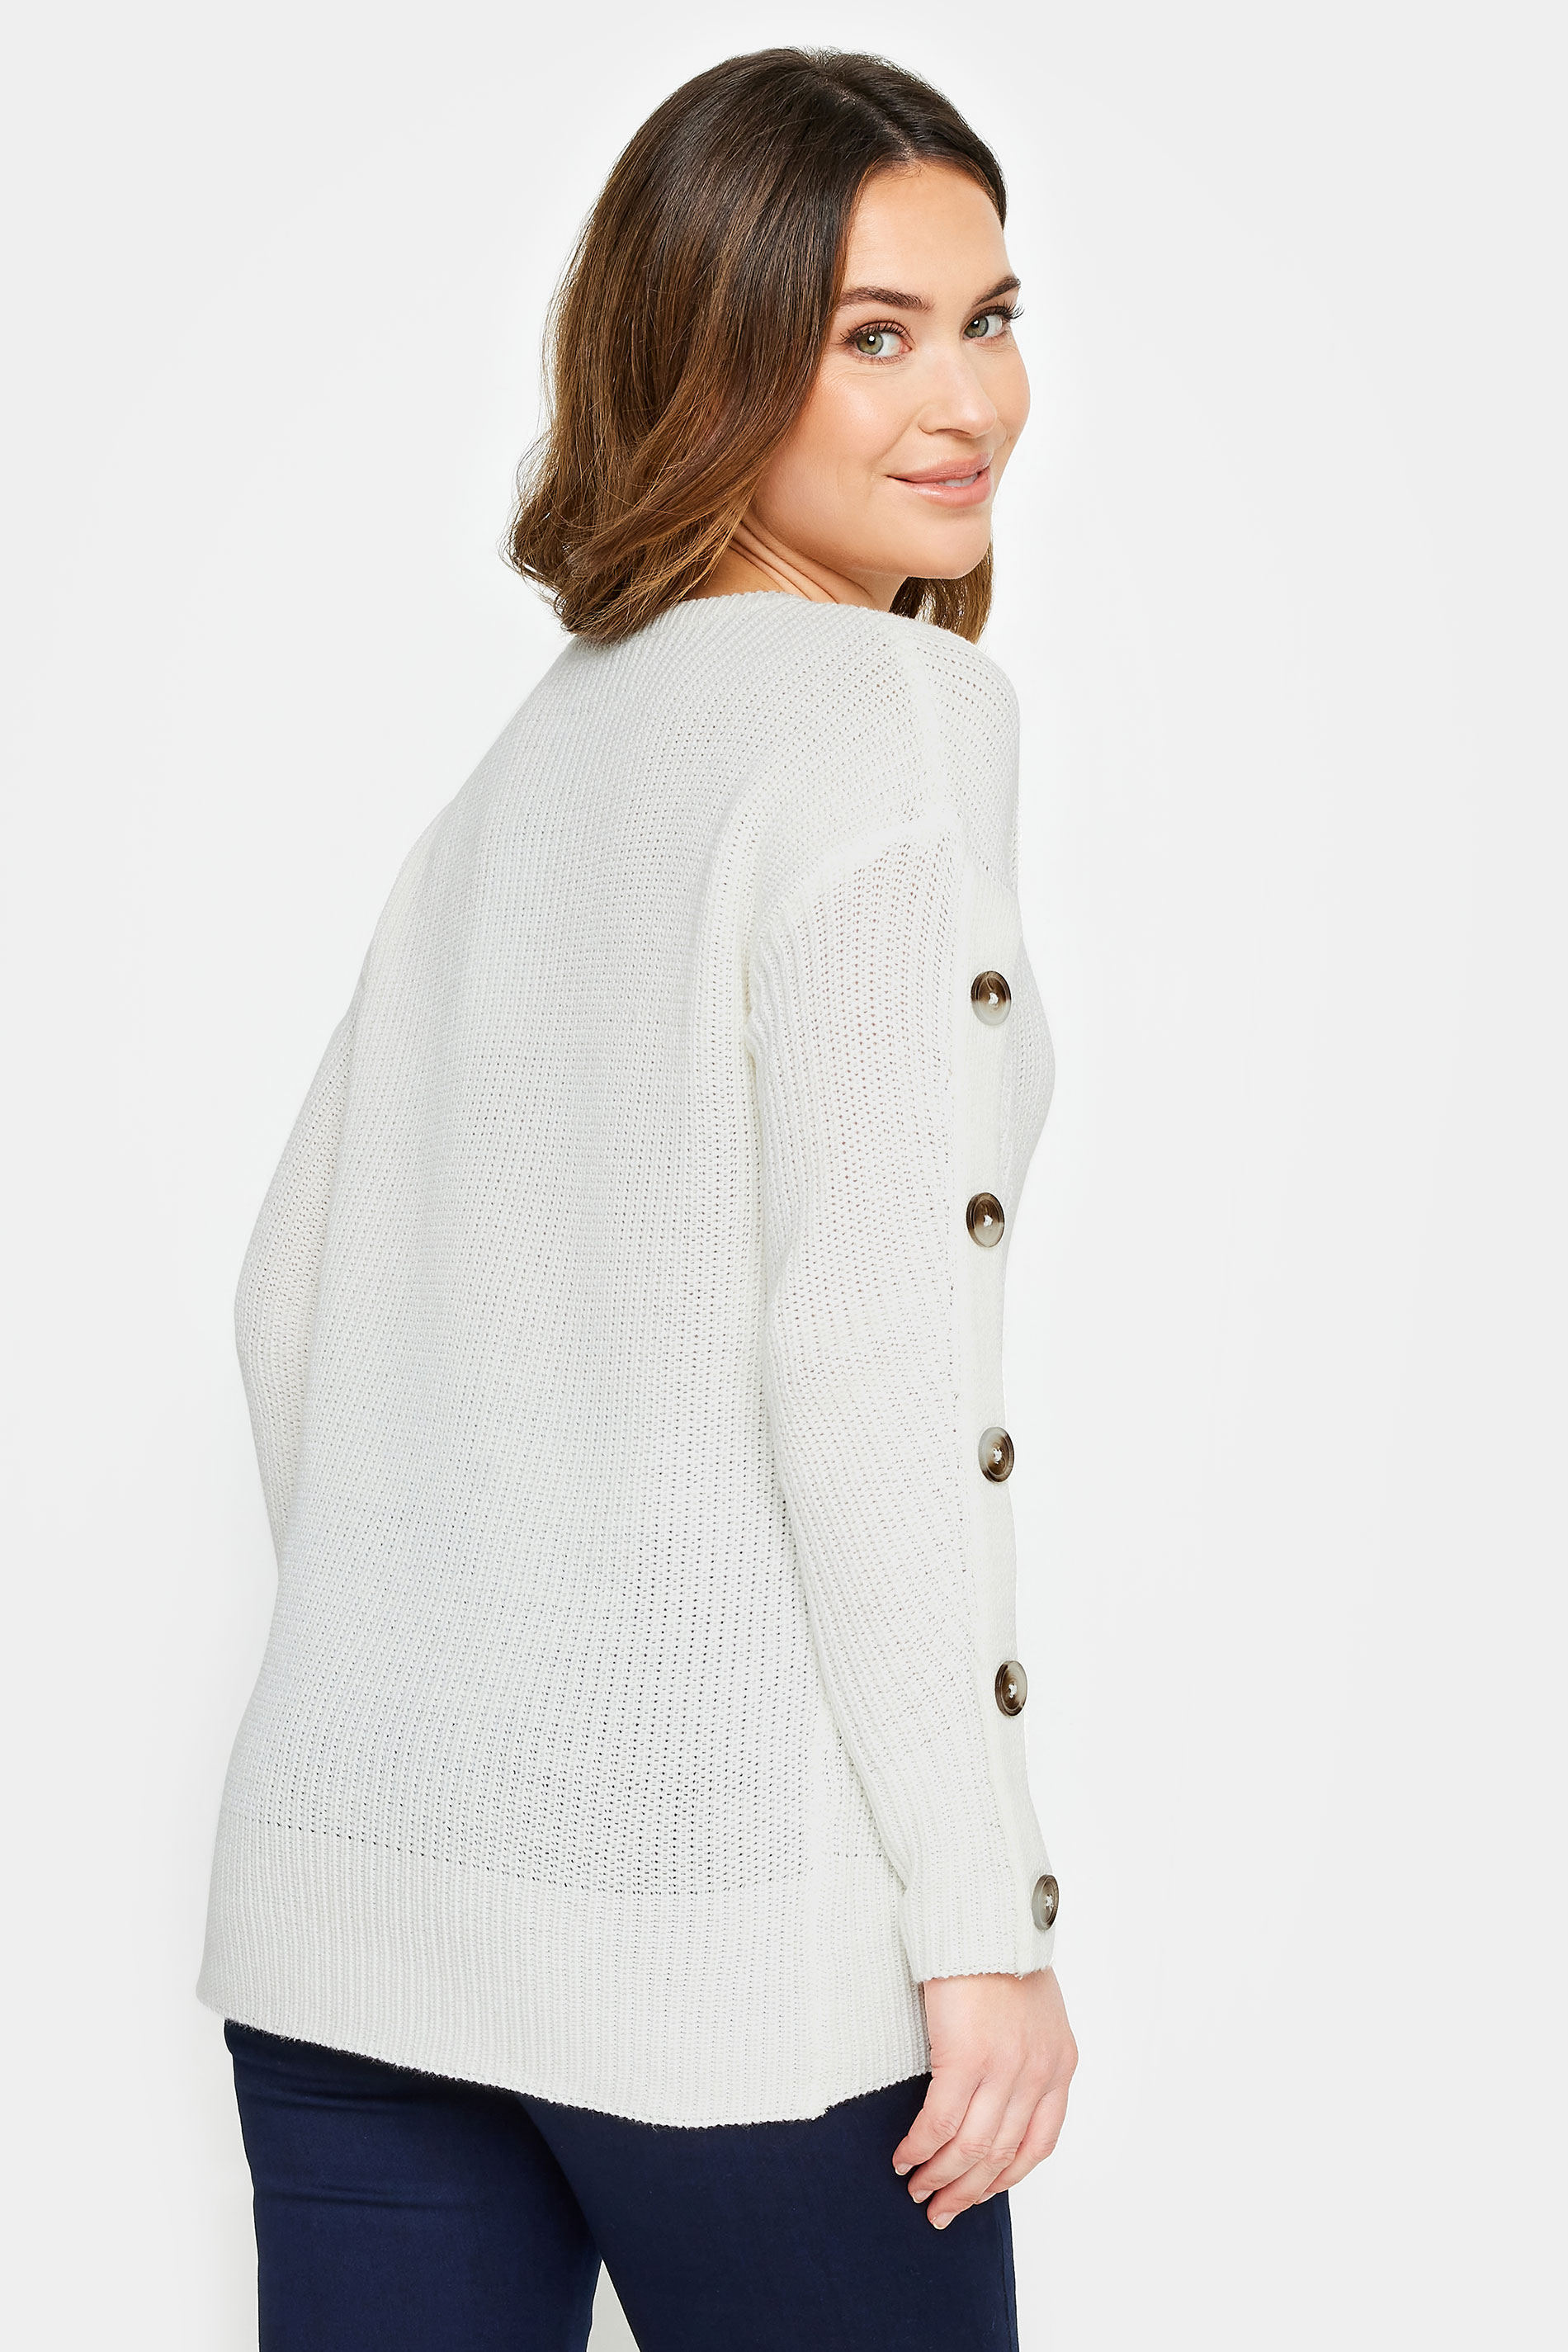 M&Co Petite Ivory White Button Sleeve Detail Jumper | M&Co 2